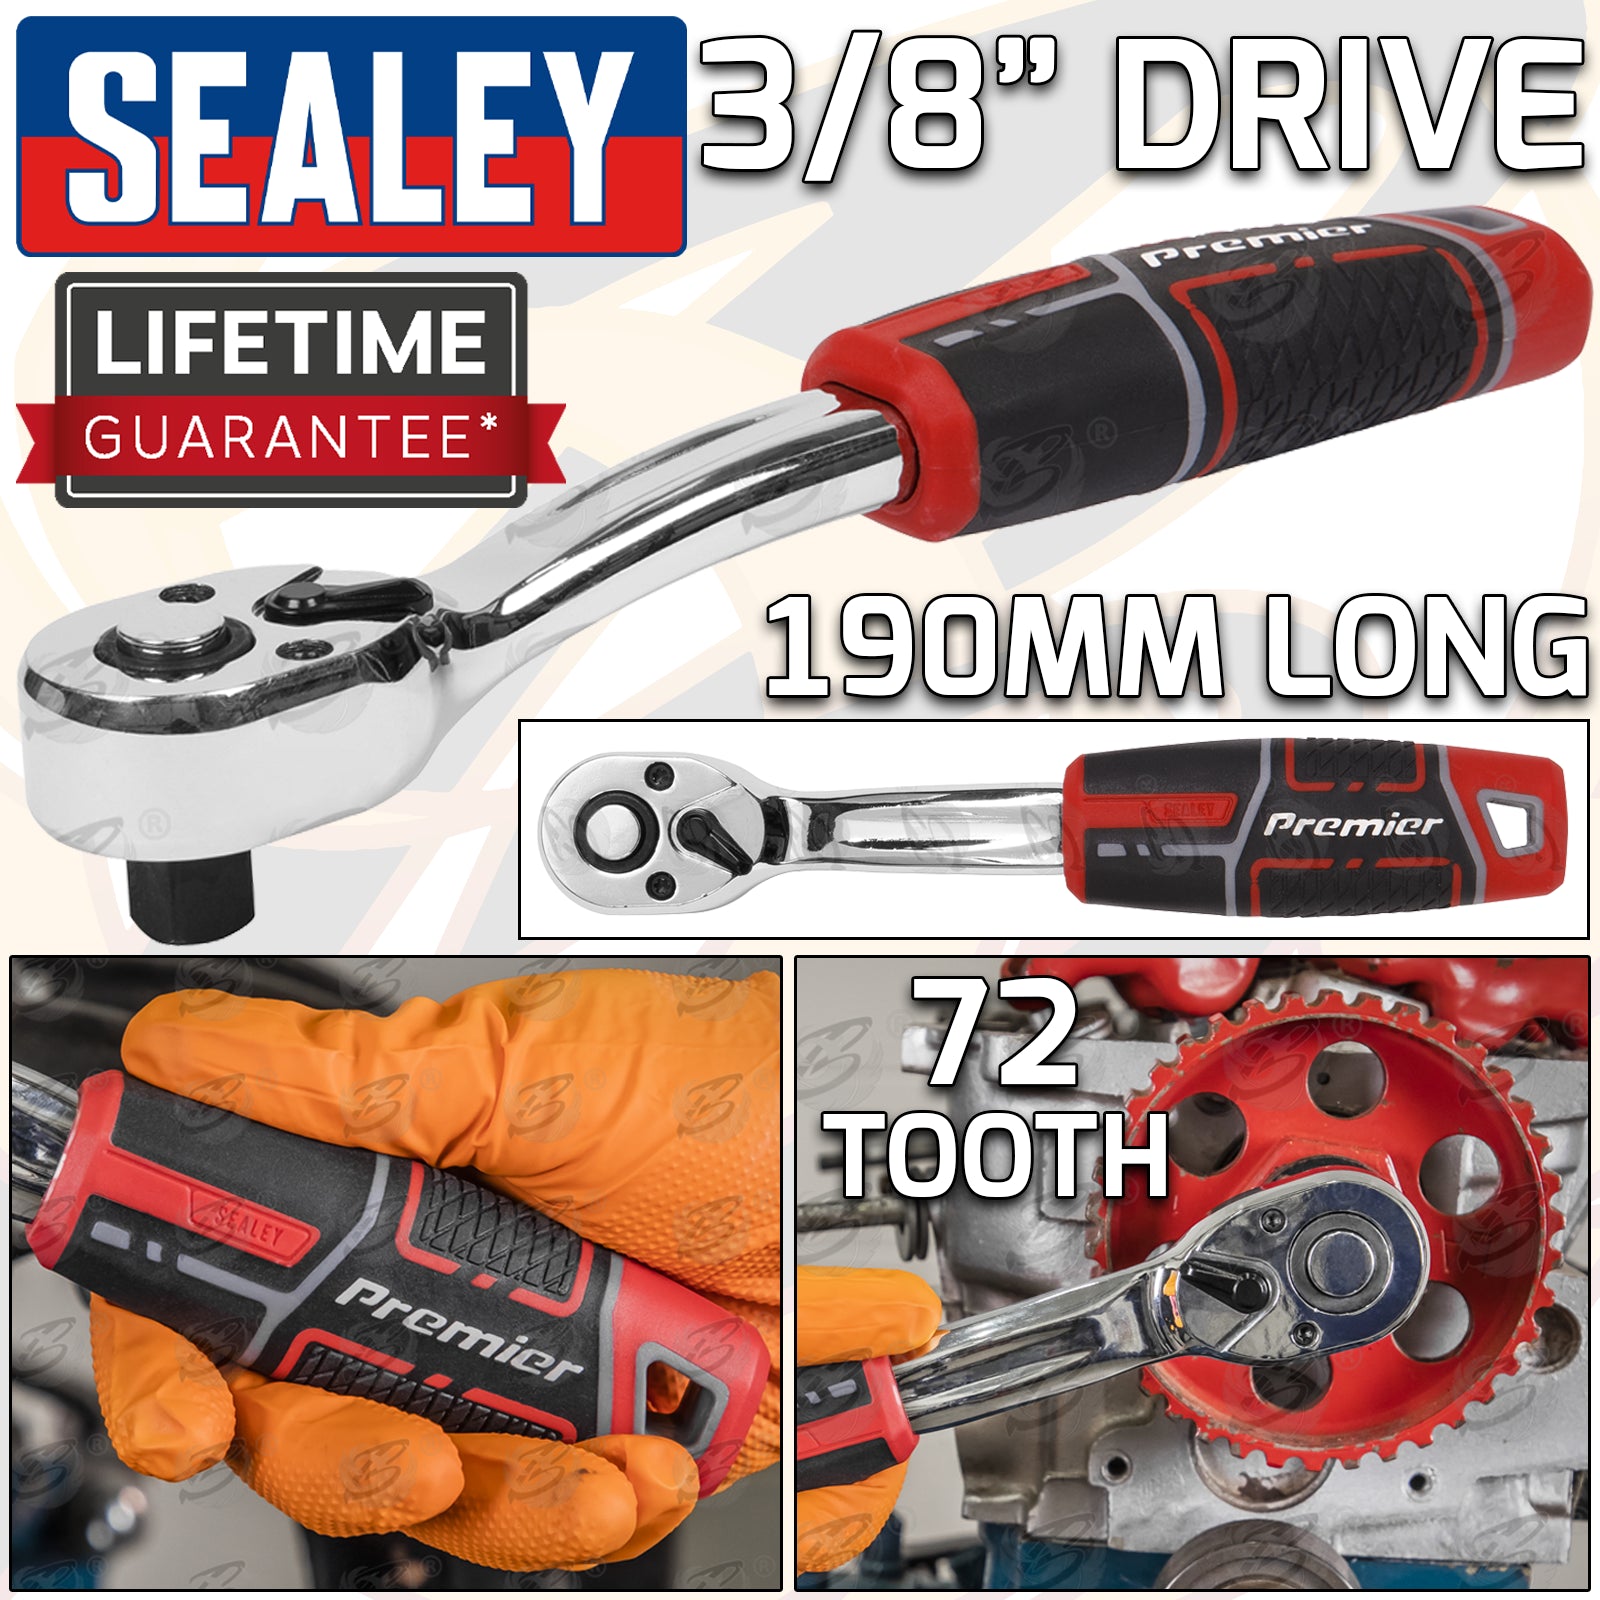 SEALEY 3/8" DRIVE 72 TOOTH CURVED RATCHET